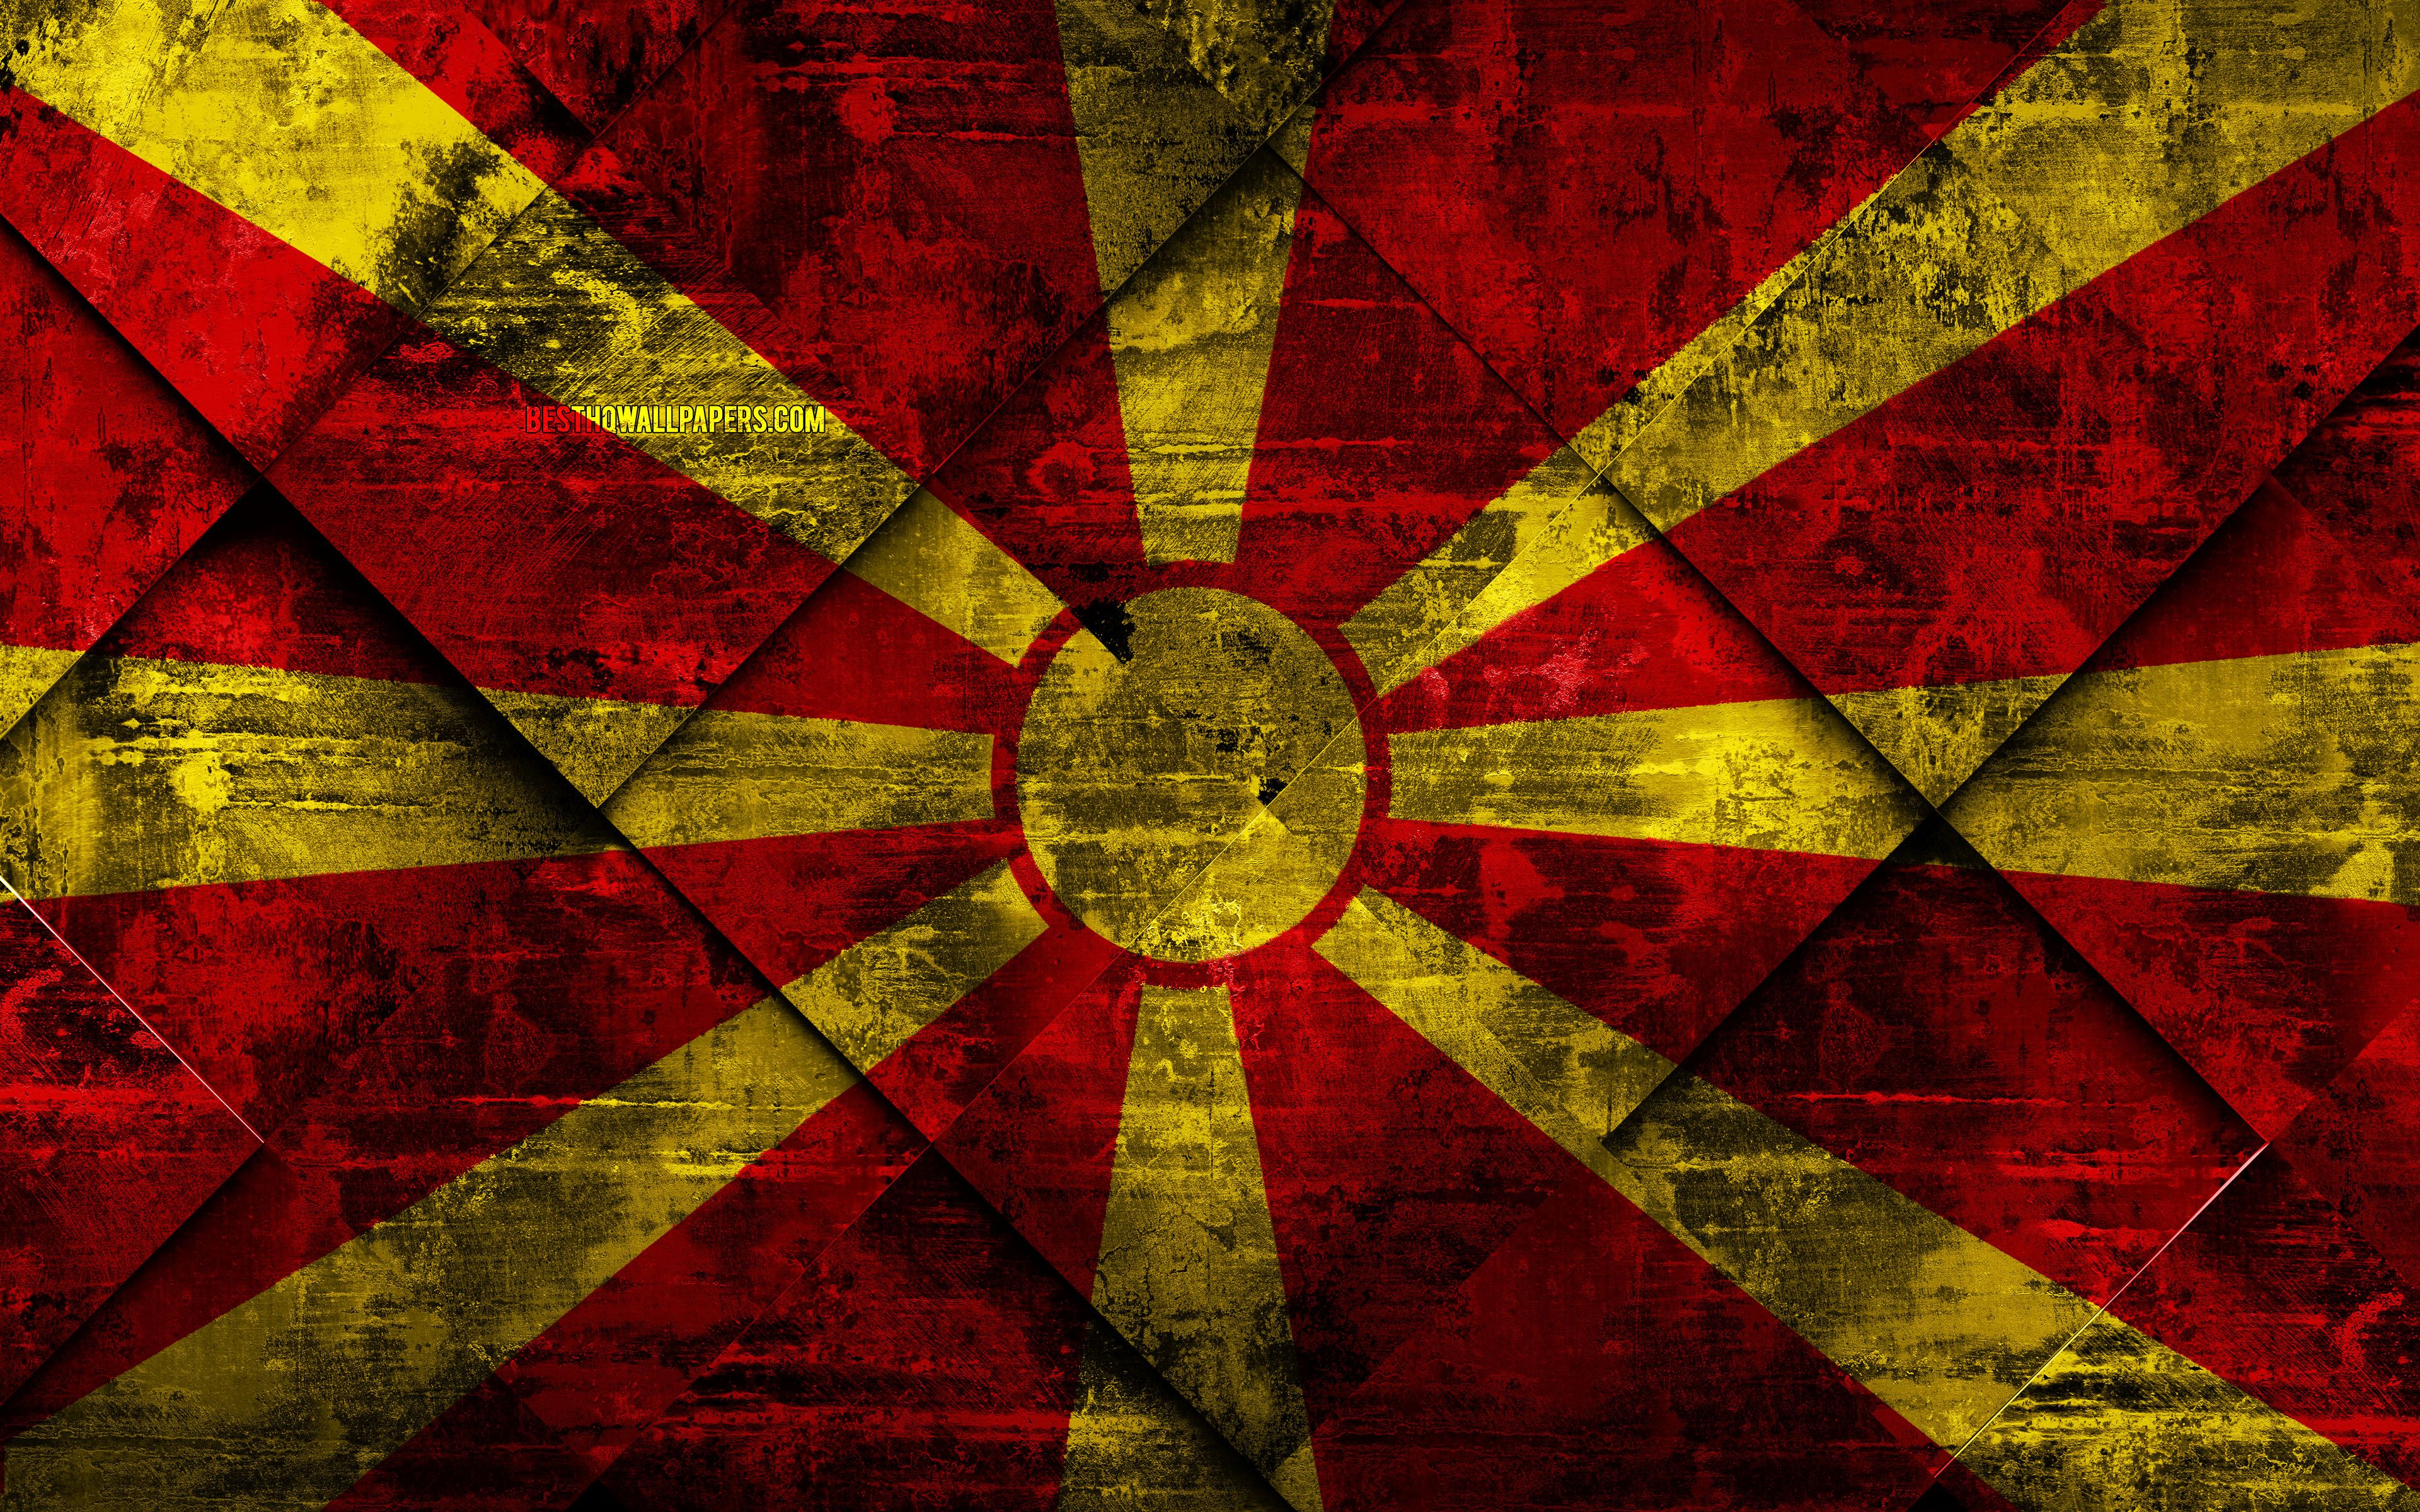 Download wallpaper Flag of North Macedonia, 4k, grunge art, rhombus grunge texture, North Macedonia flag, Europe, national symbols, North Macedonia, creative art for desktop with resolution 3840x2400. High Quality HD picture wallpaper